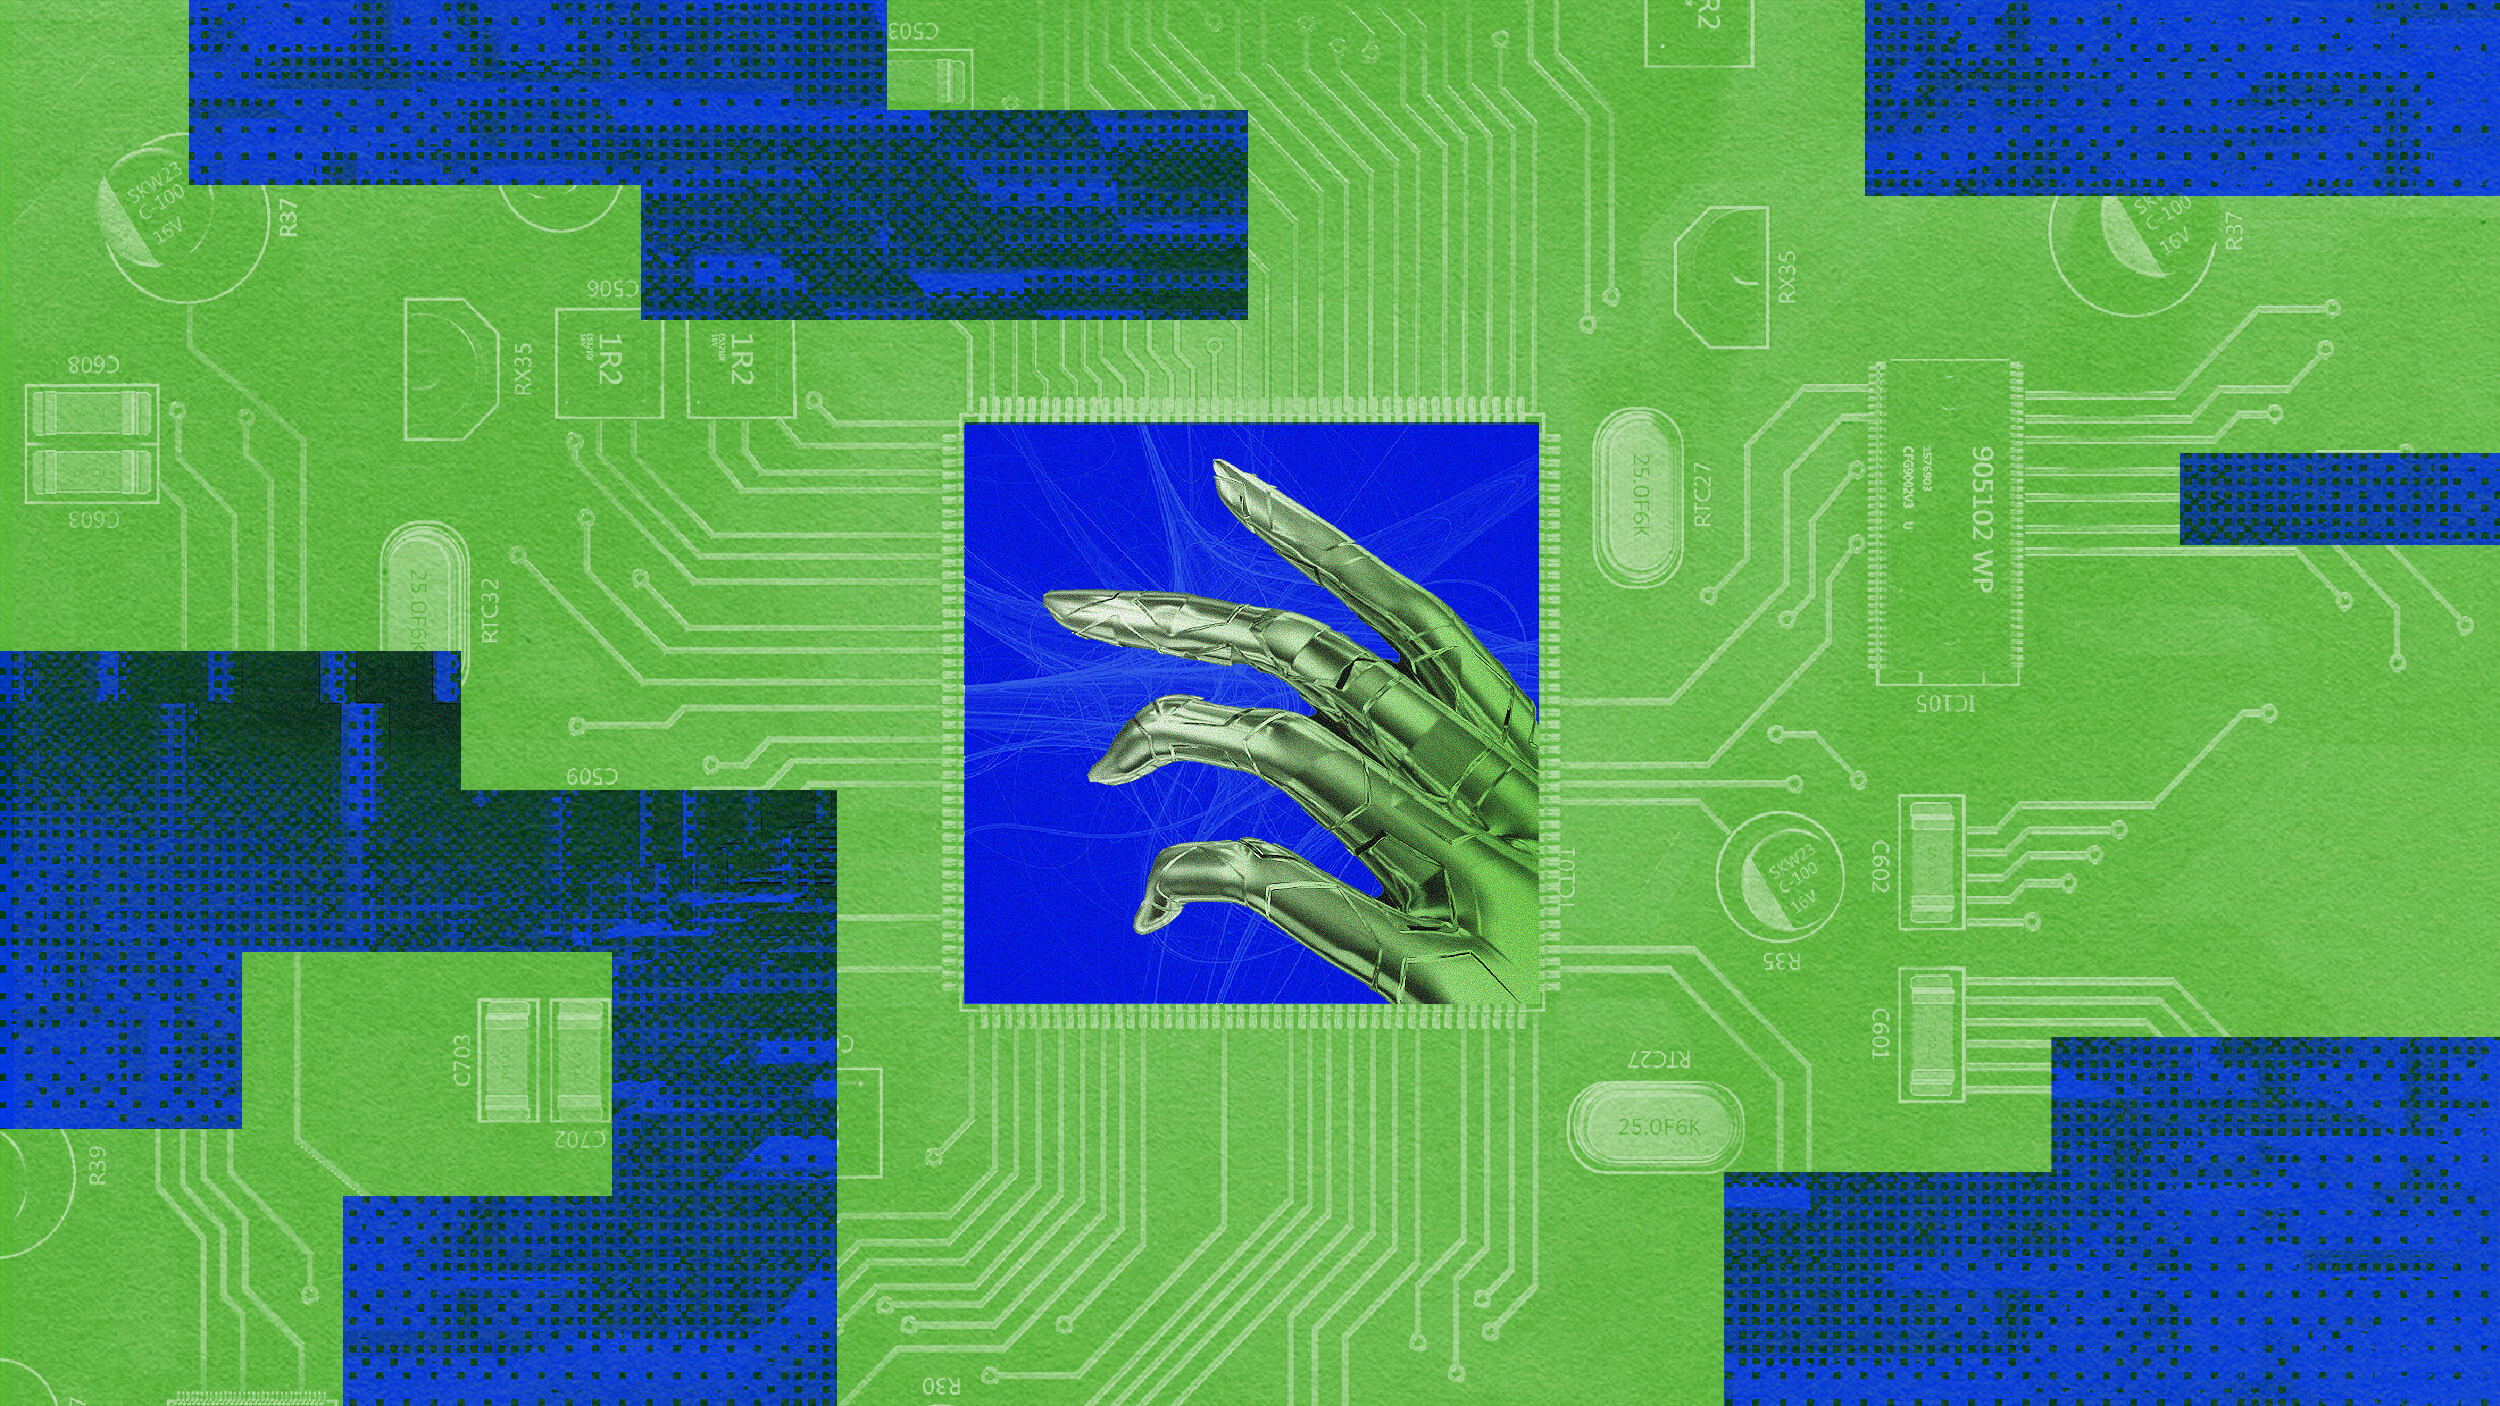 A robotic hand is centered against a blue background, surrounded by a green and blue circuit board pattern, symbolizing the intricate processes of math AI and why machines learn.